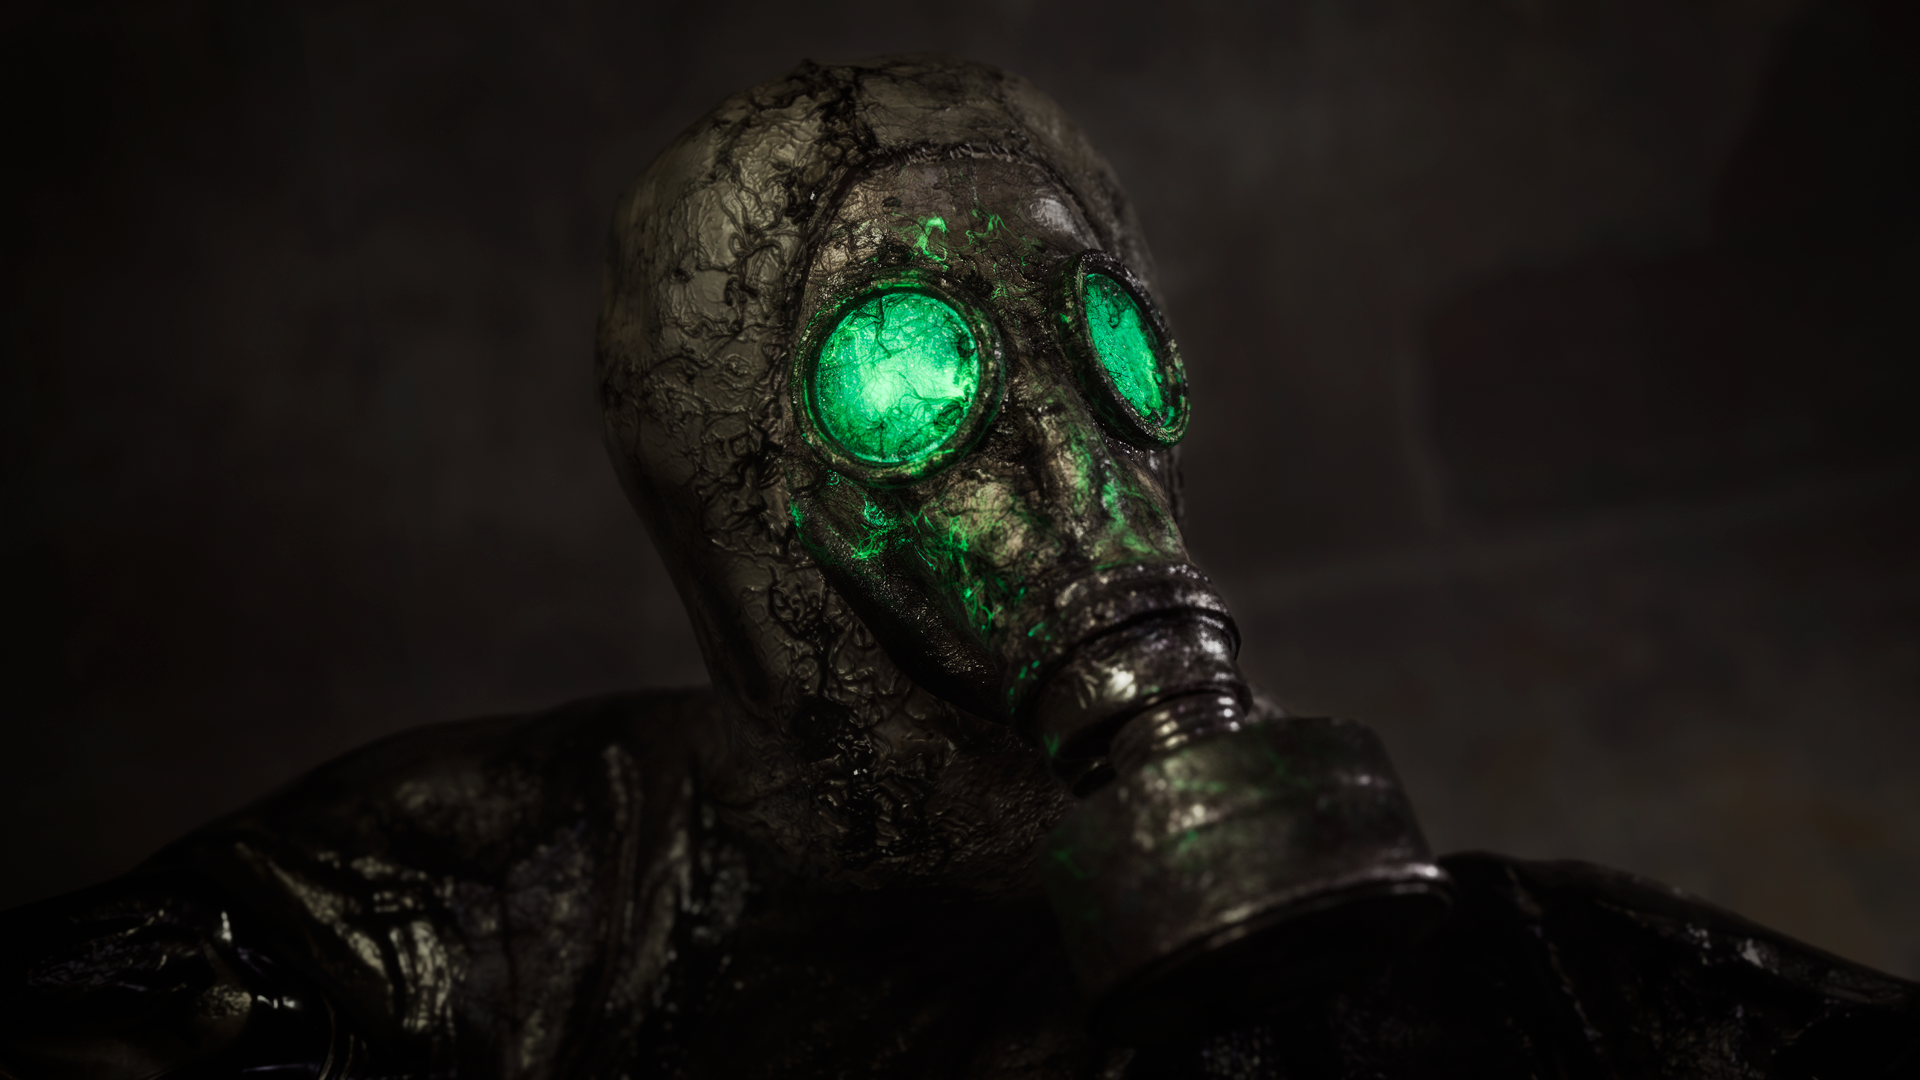 Chernobylite is a new sci-fi, survival horror game from The Farm 51 | VG247